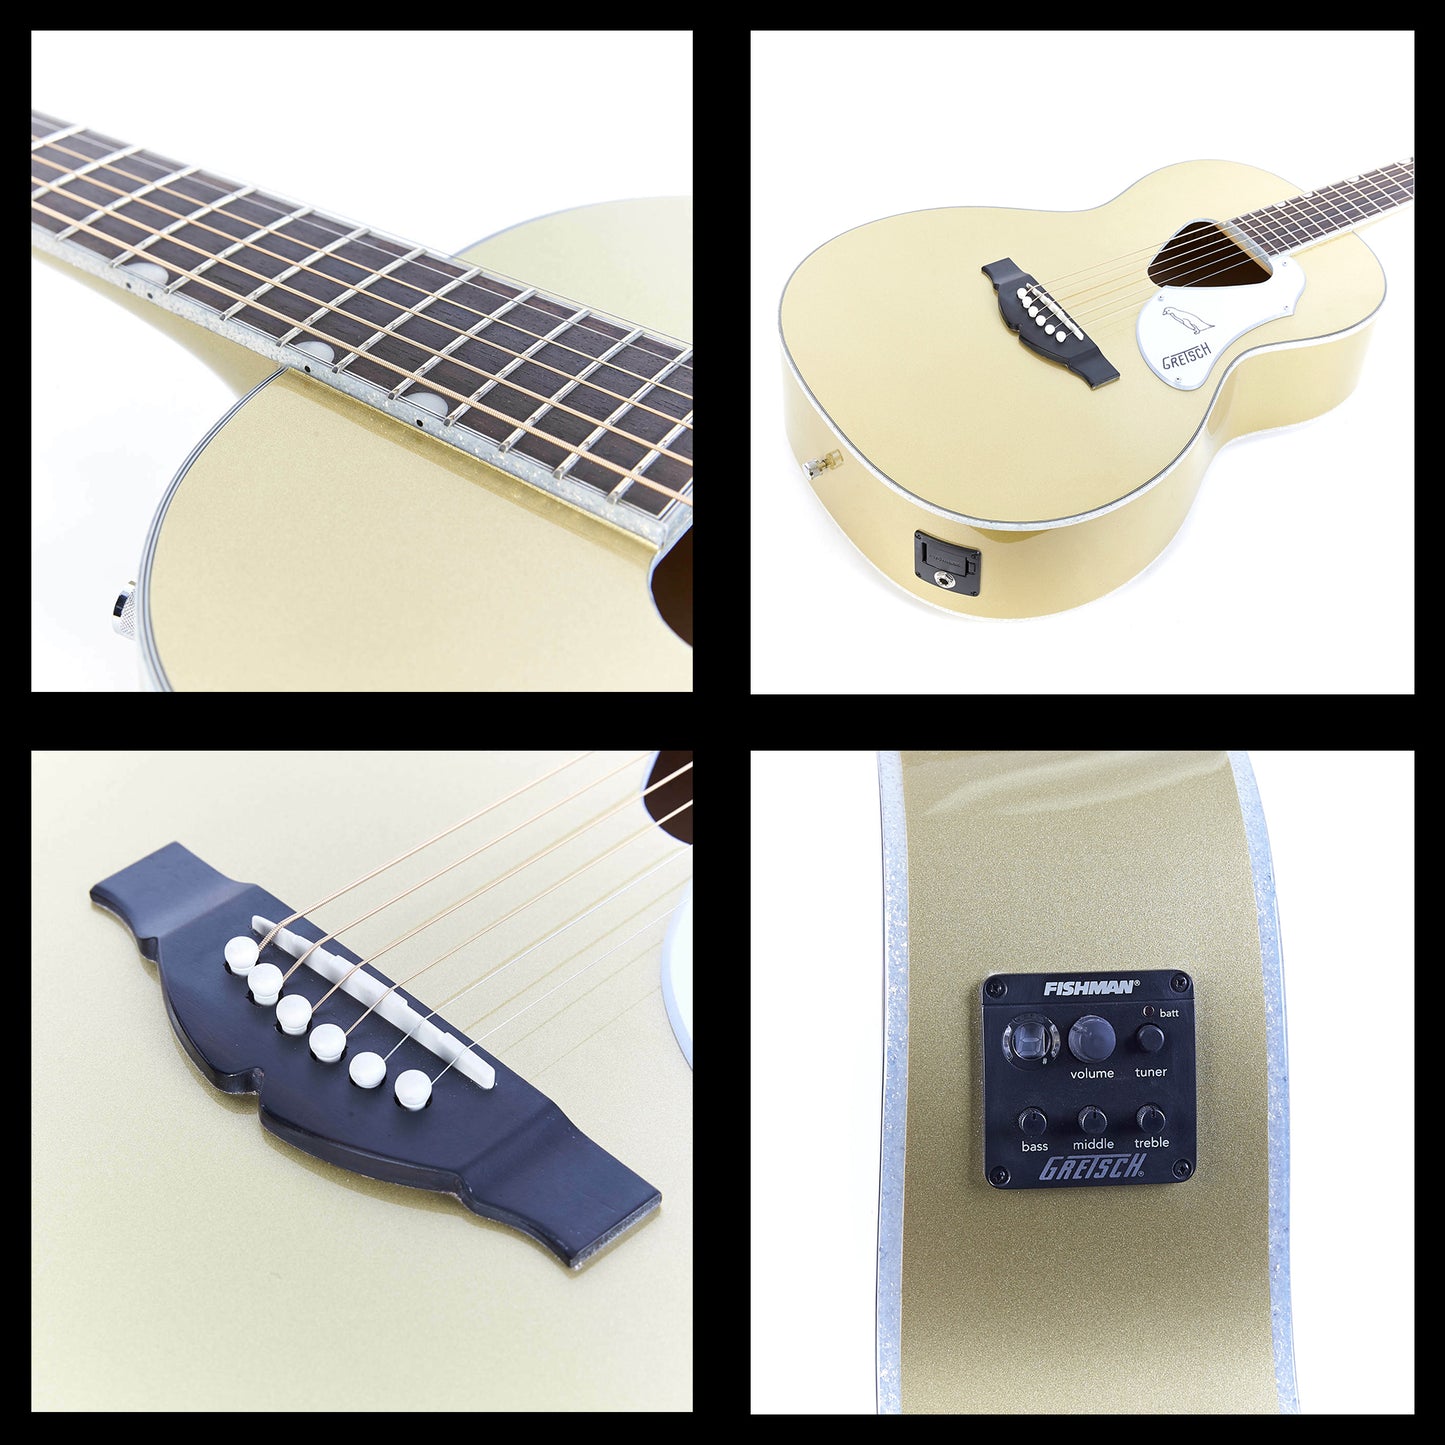 Gretsch G5021E Limited Edition Rancher Penguin Parlor Electric Acoustic Guitar with Gold Finish, 20 Vintage Style Frets Right-Handed